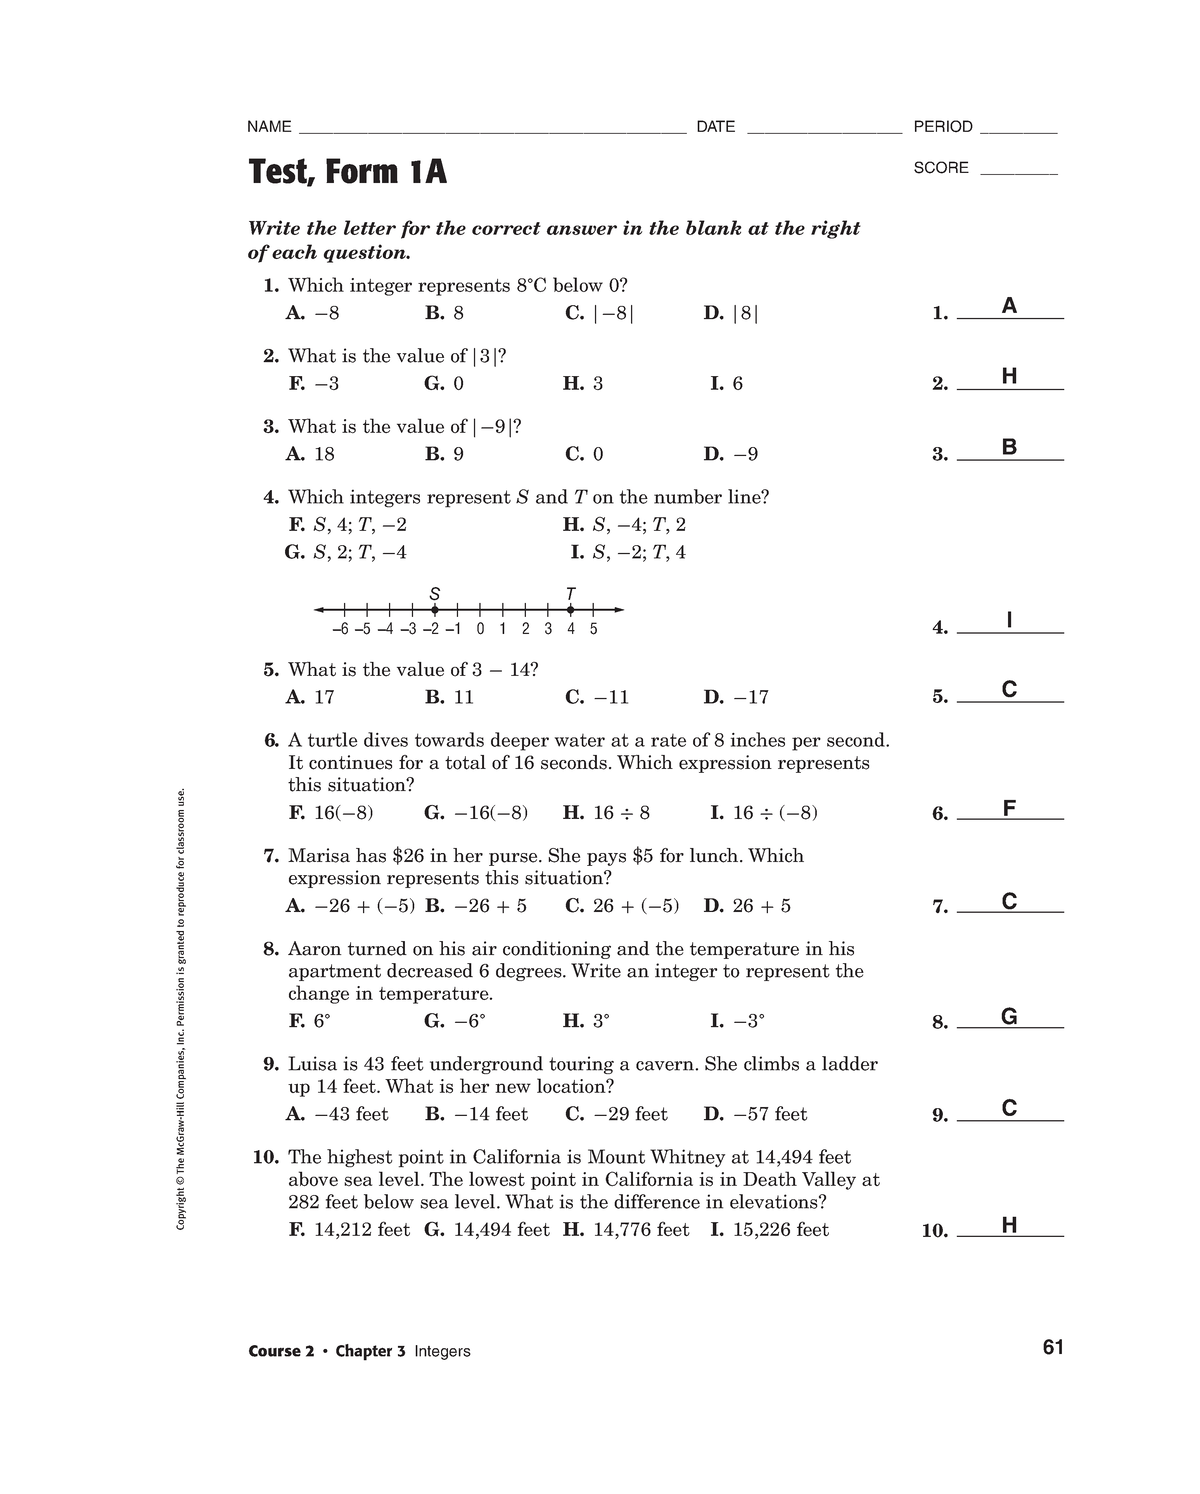 test-1a-answers-ssss-course-2-chapter-3-integers-61-name-studocu